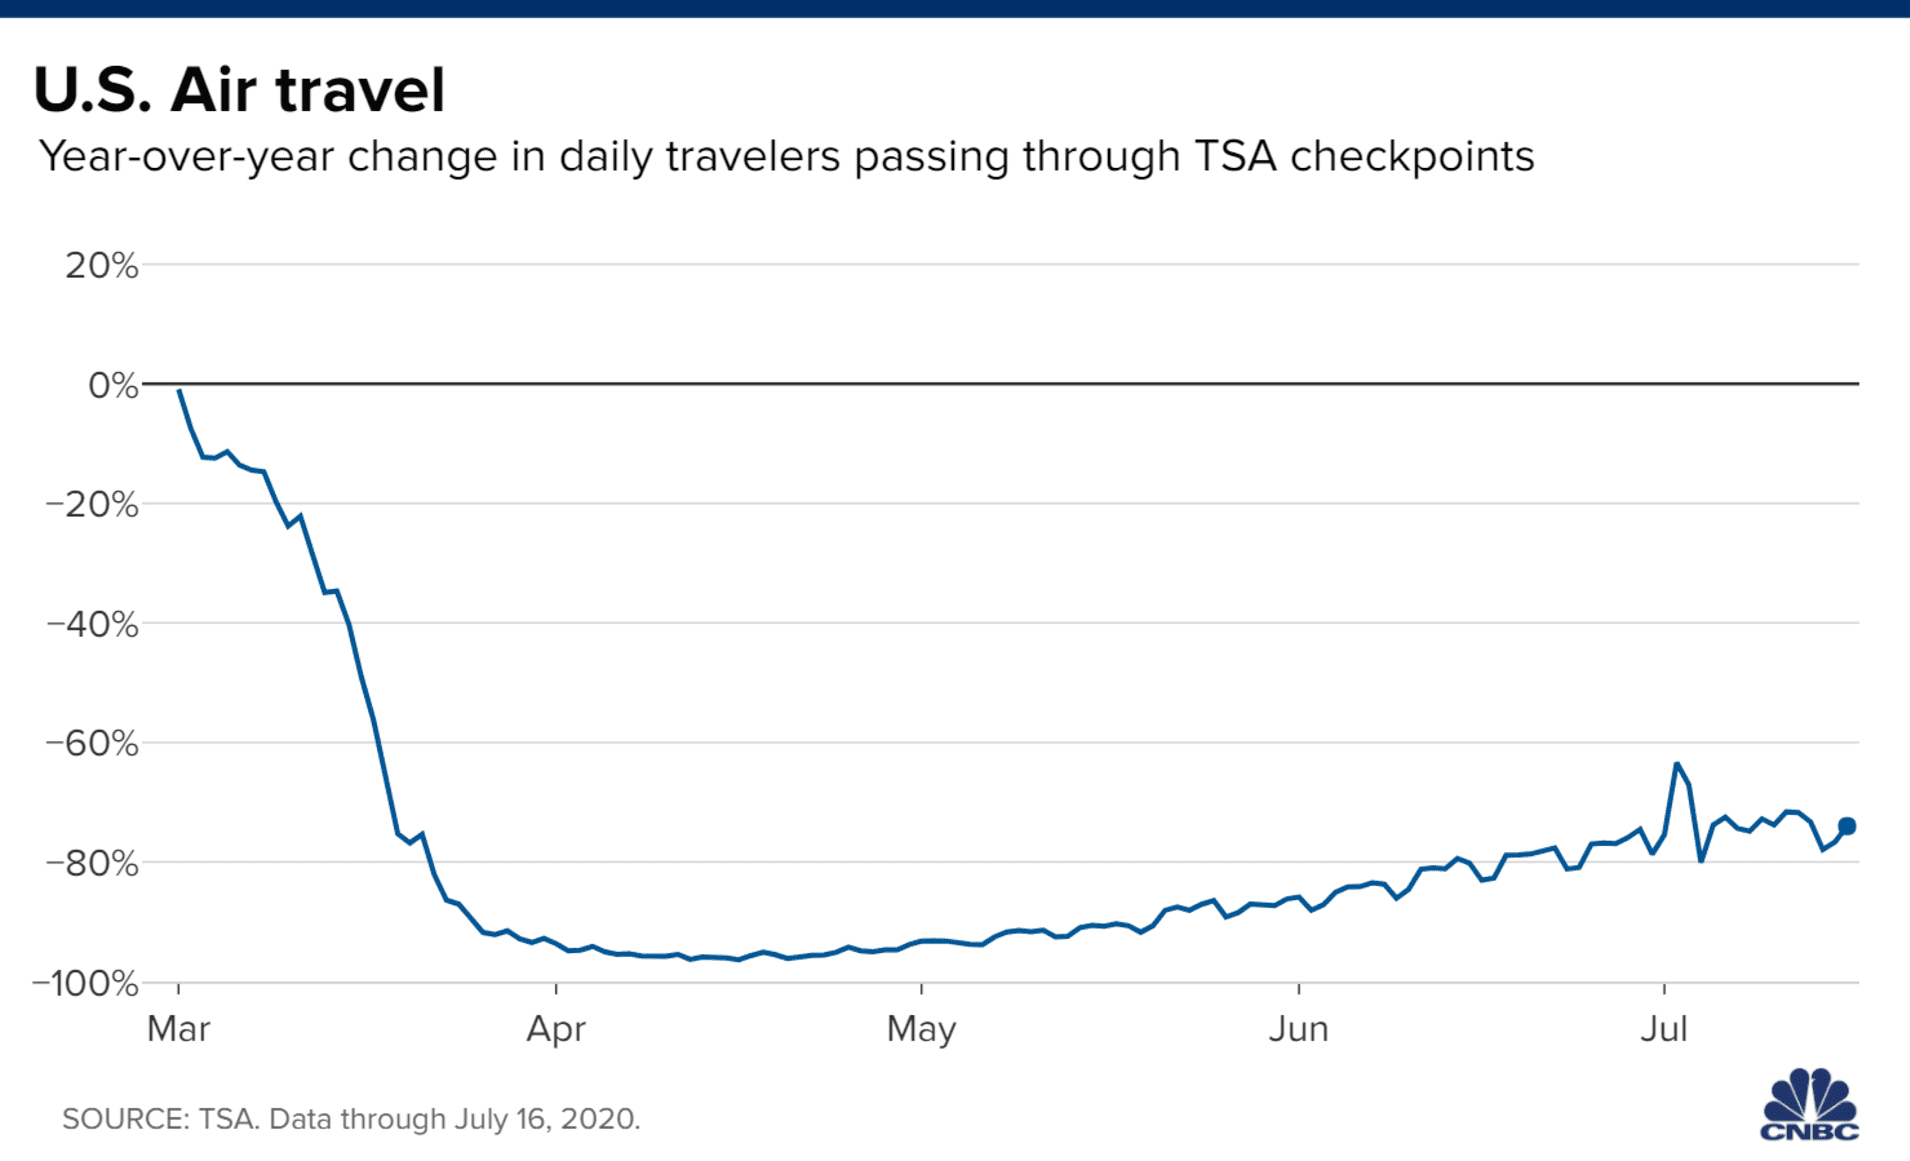 Chart of the year-over-year change in daily travelers passing through TSA checkpoints with data through July 16, 2020.